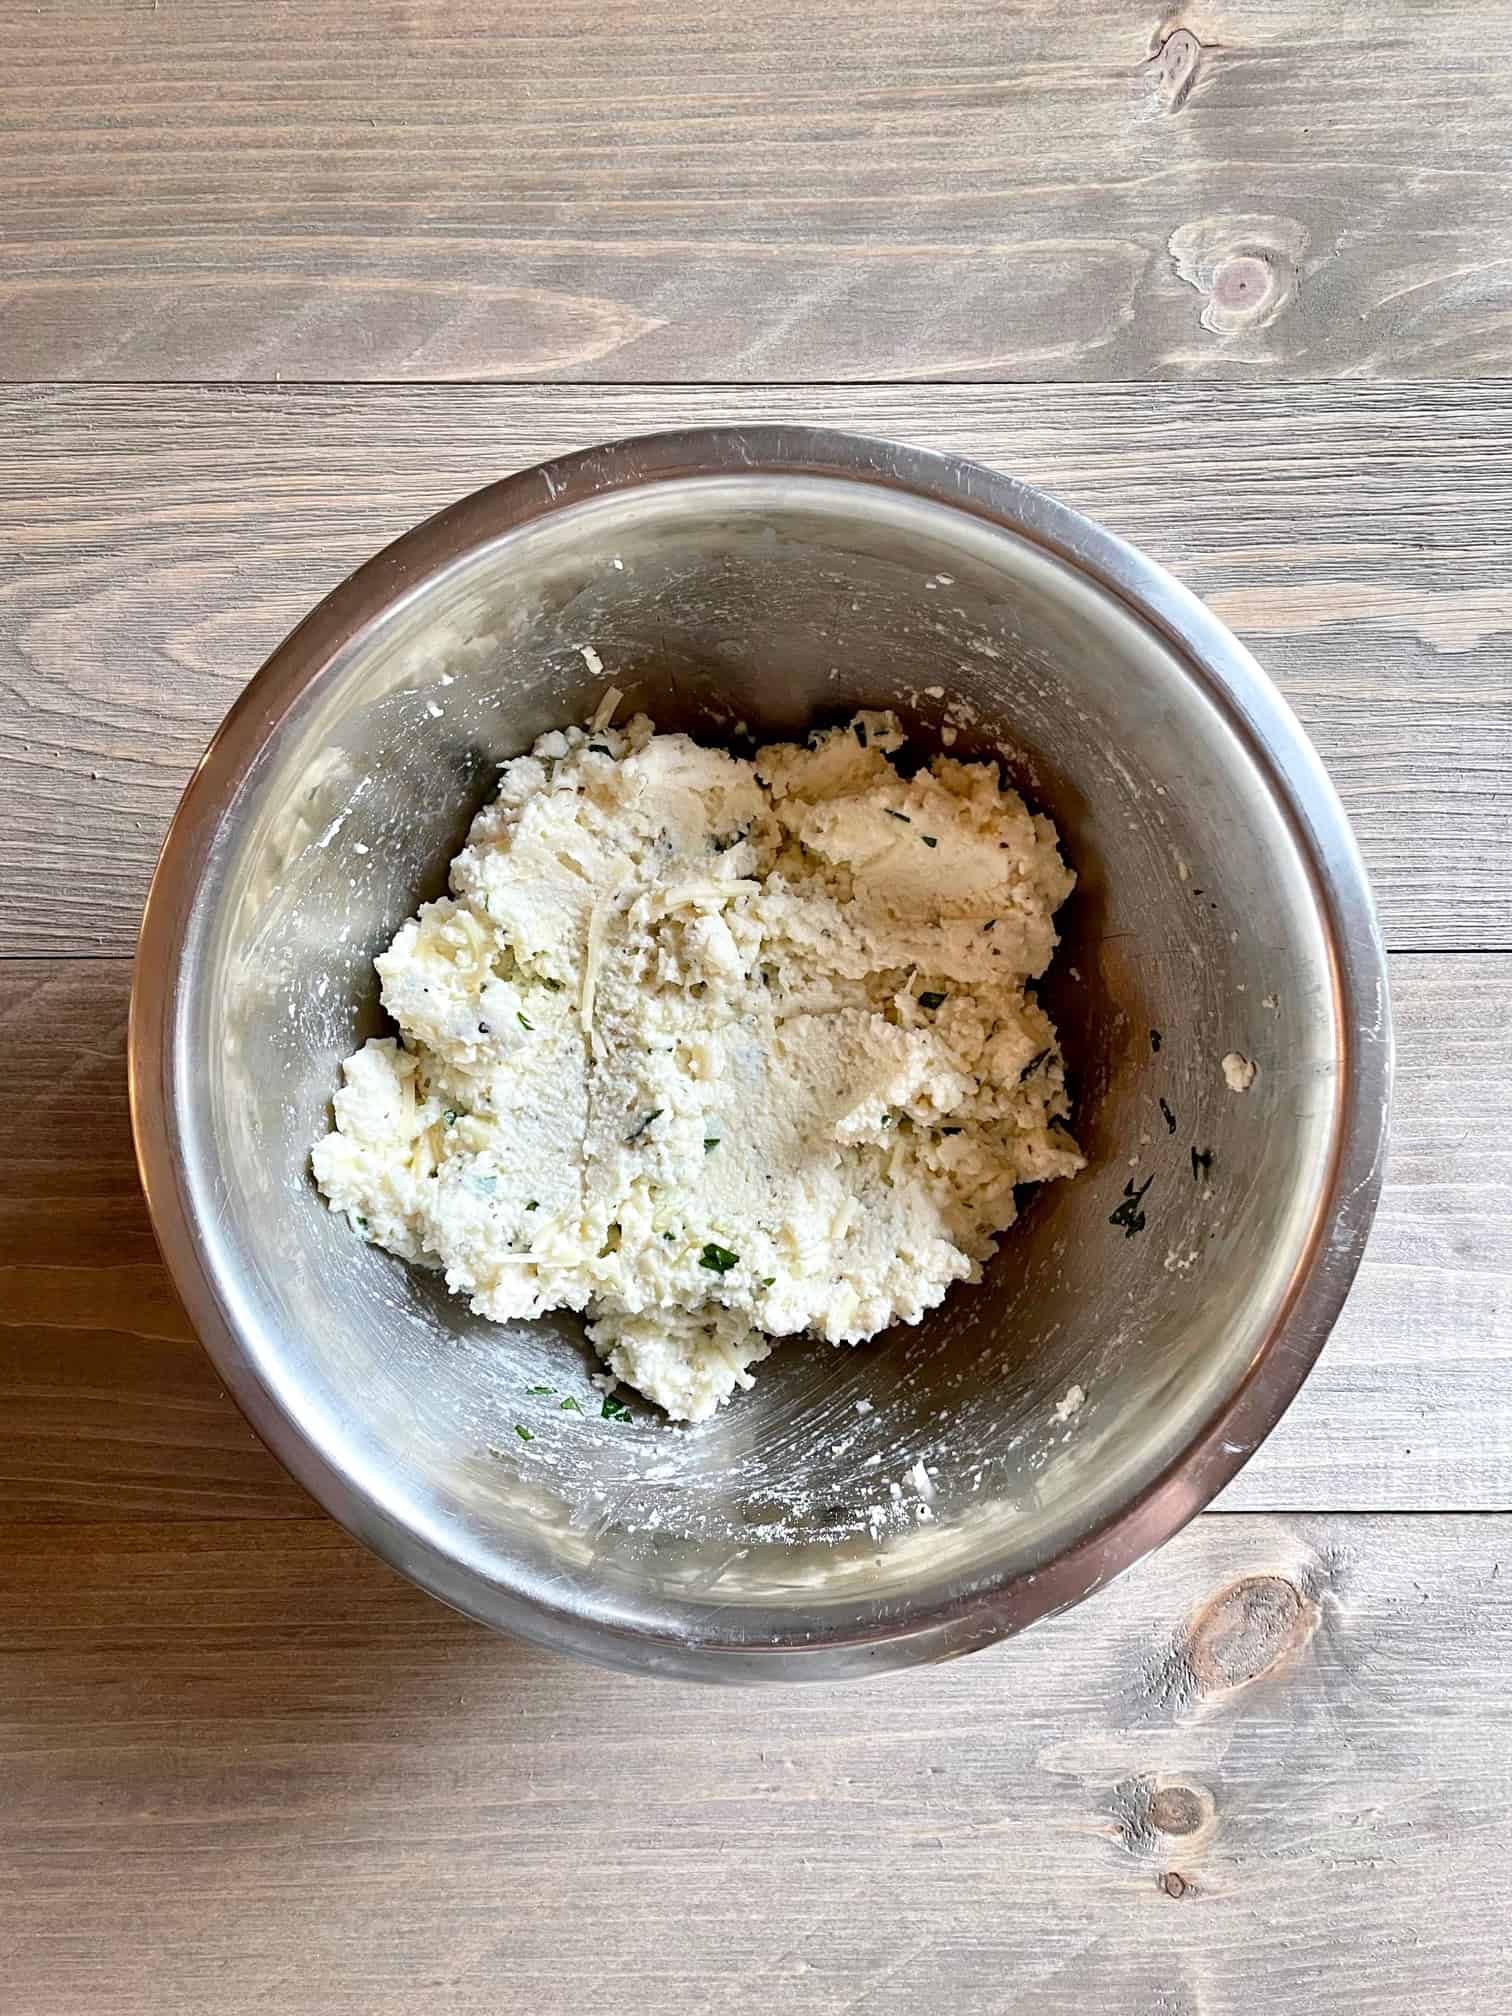 Ricotta cheese mixture in a stainless steel mixing bowl.